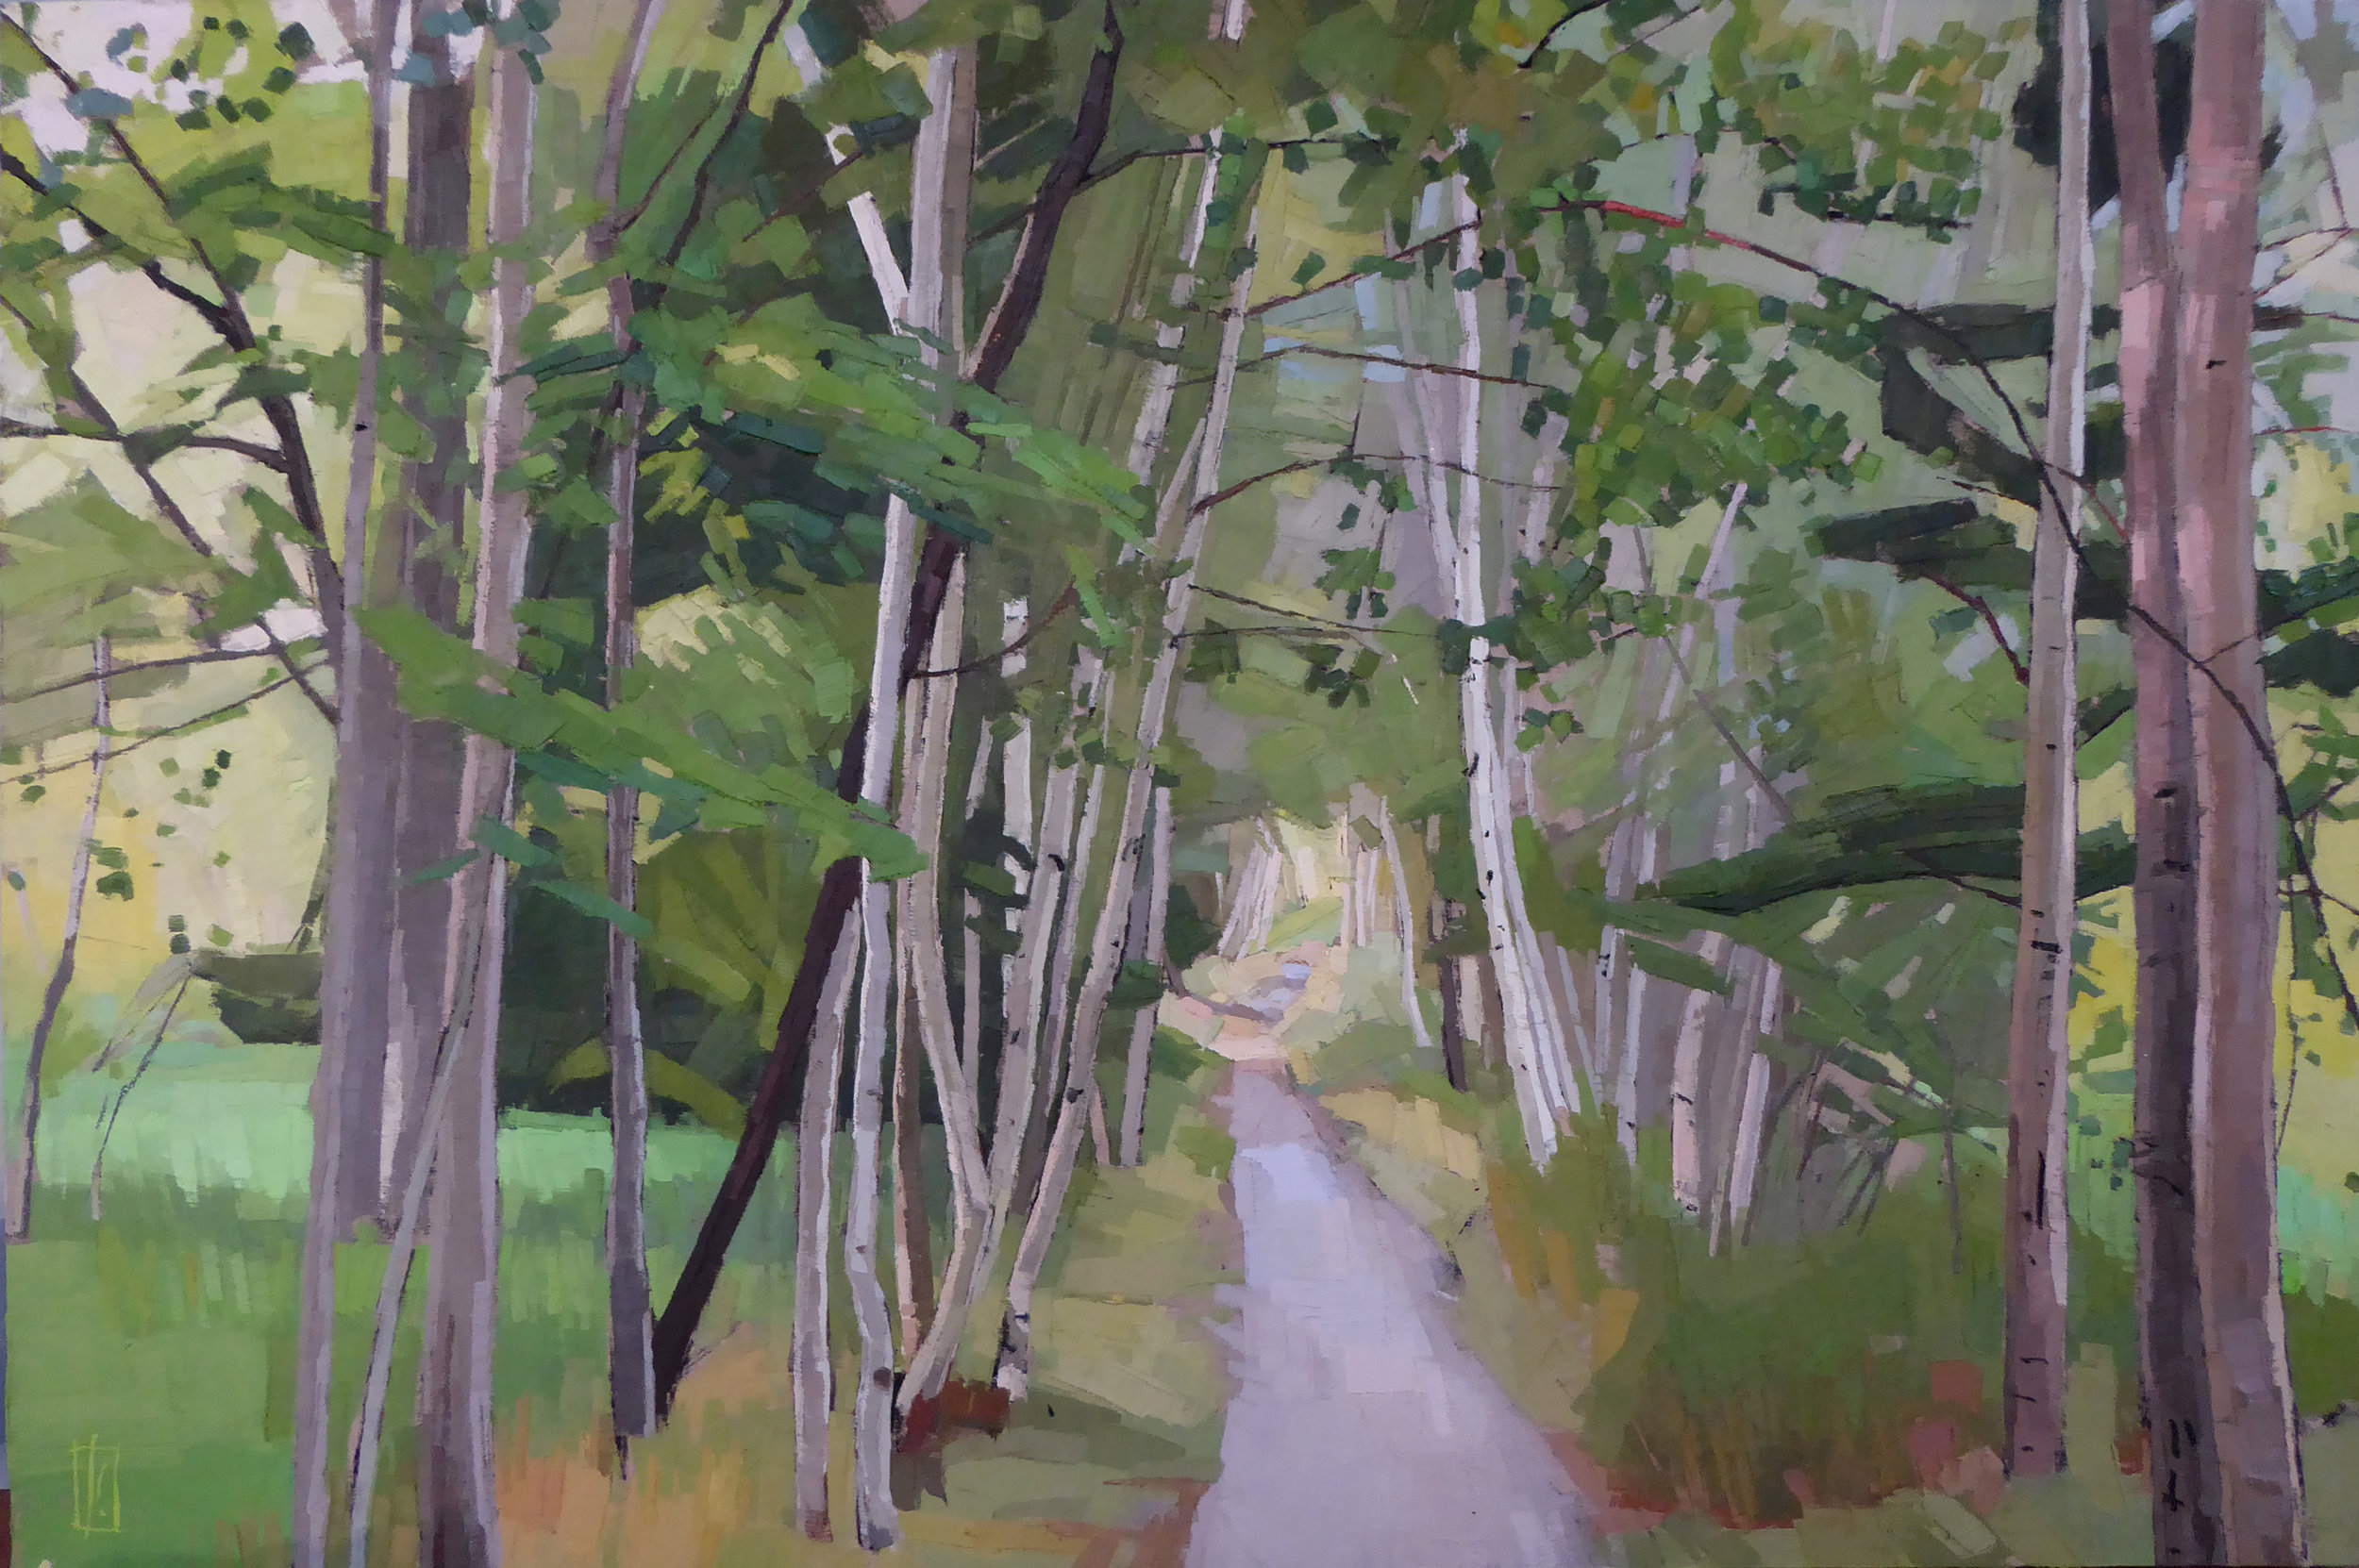   Birch Tunnel  24 x 36 oil on linen mounted on cradled panel  sold   Powers Gallery  